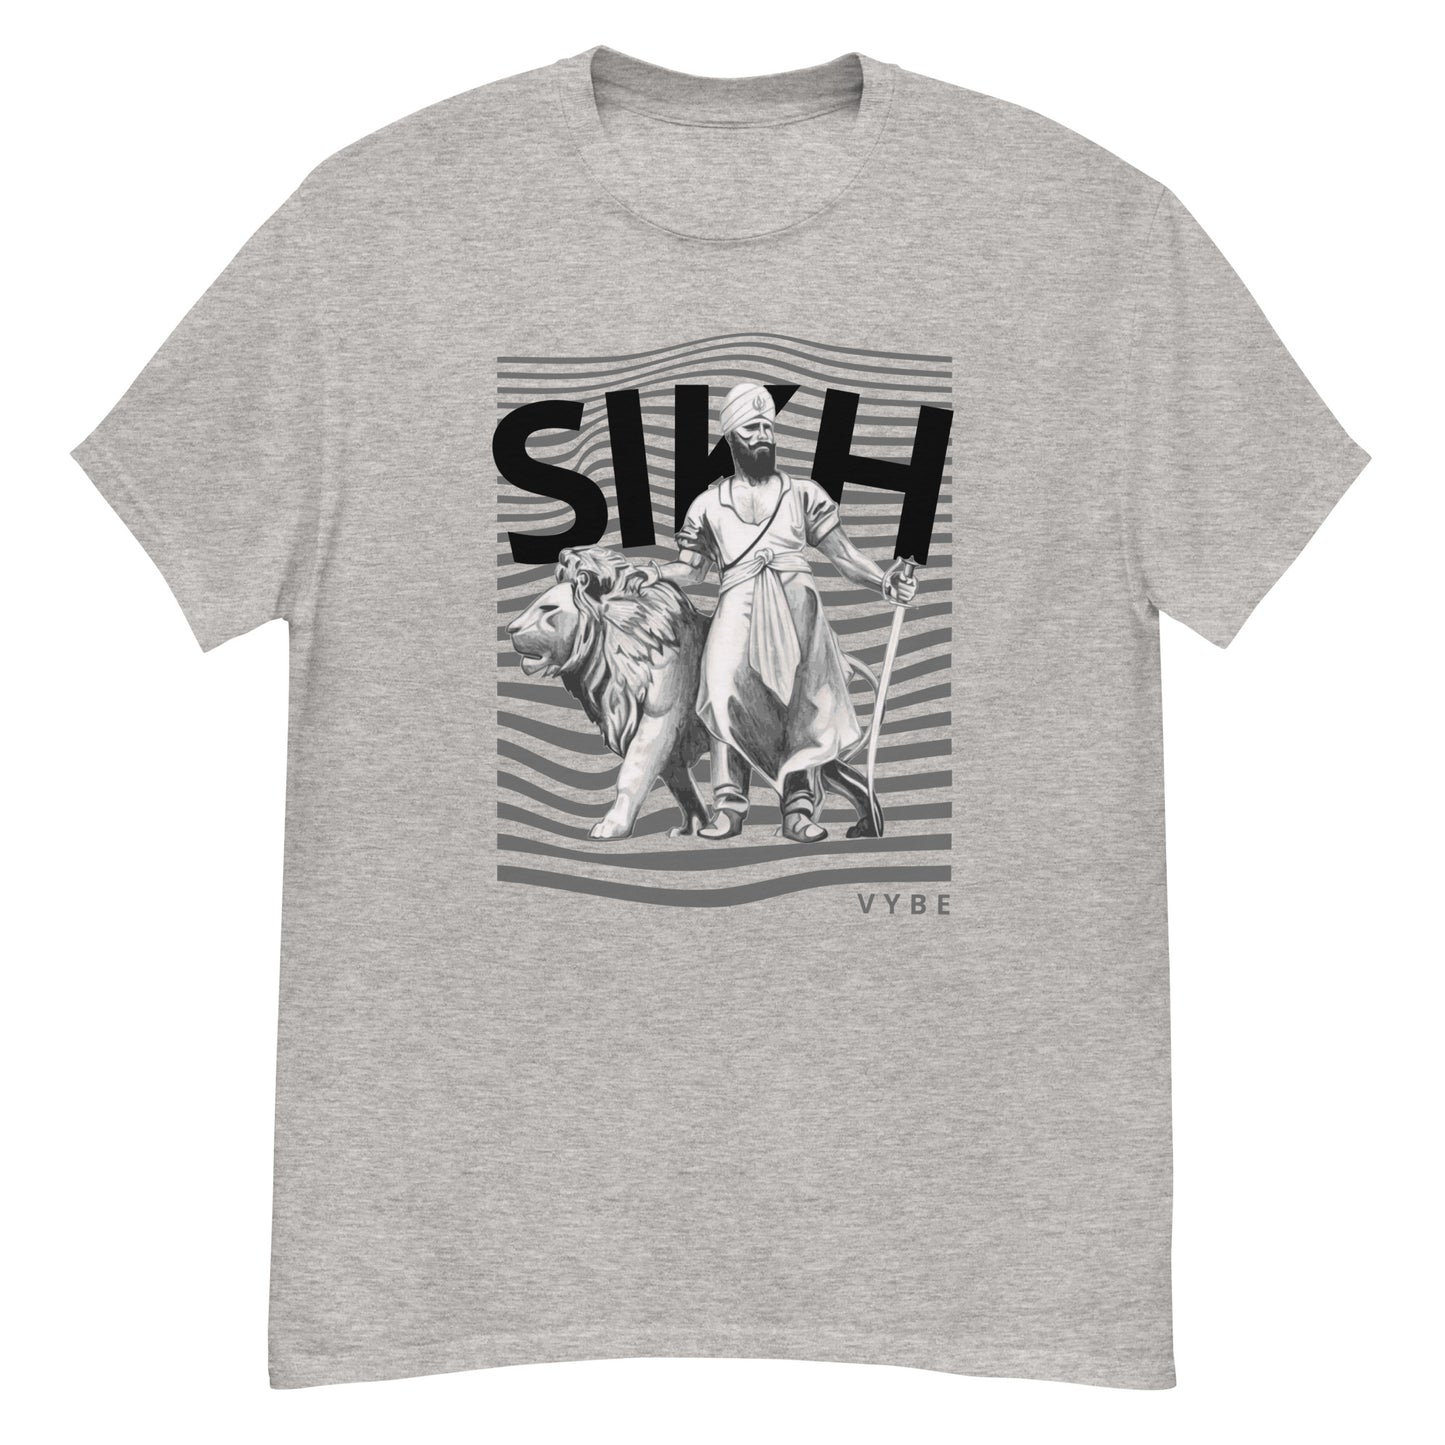 Sikh Vybe - Grey Tee